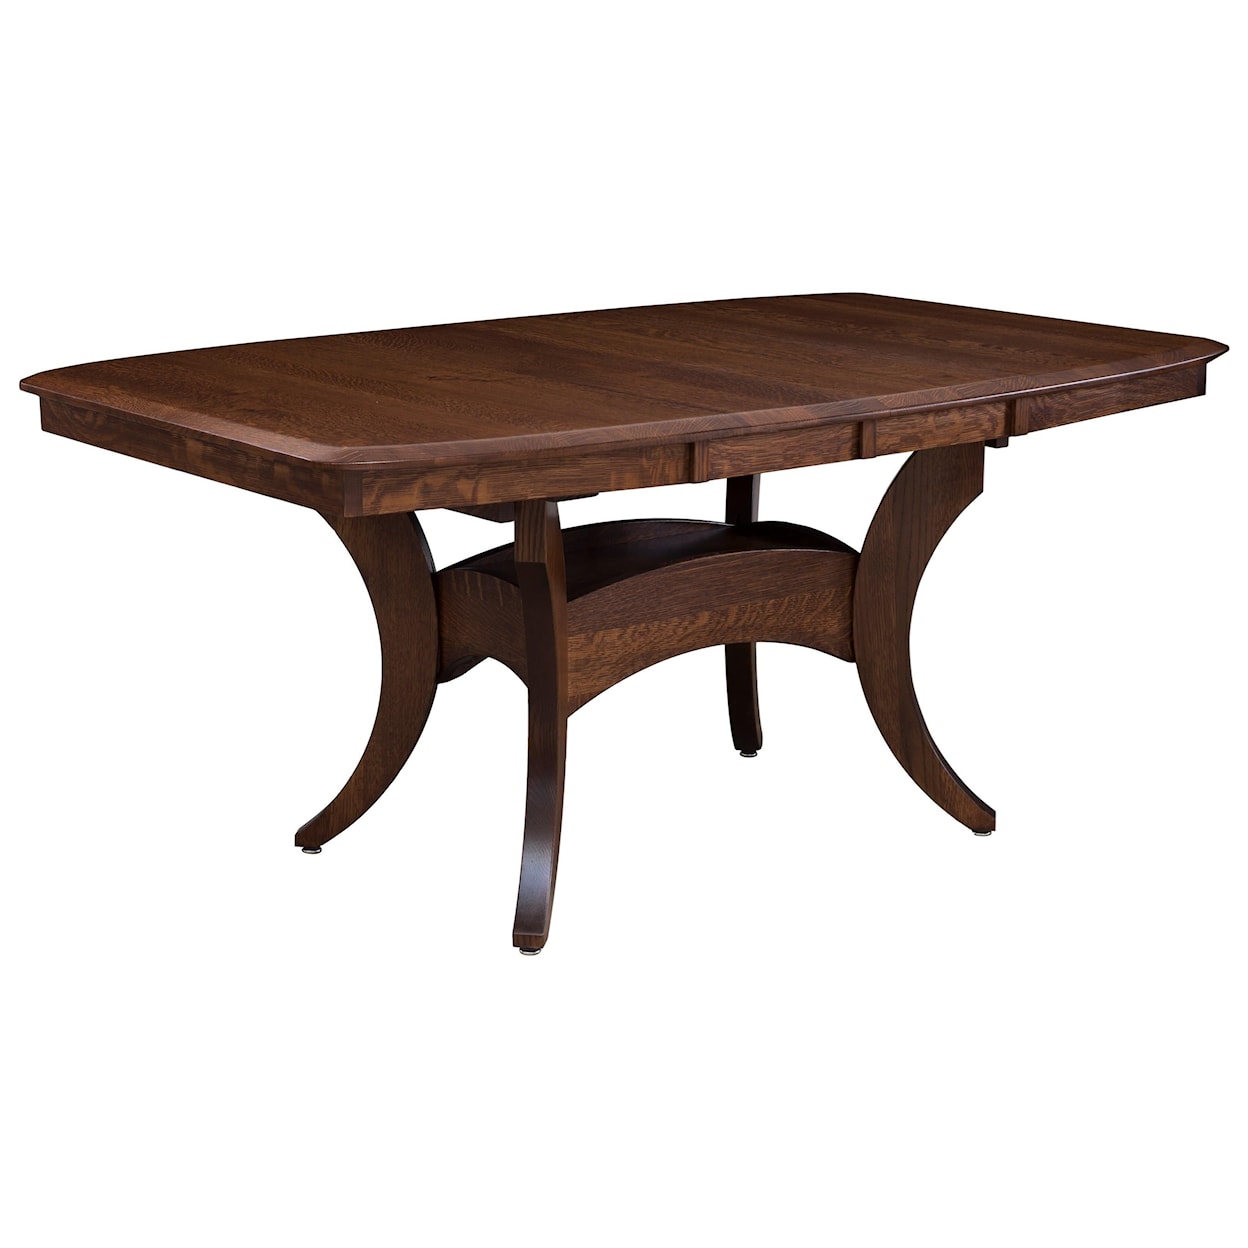 Amish Dining Room Fort Knox 48x72" Dining Table